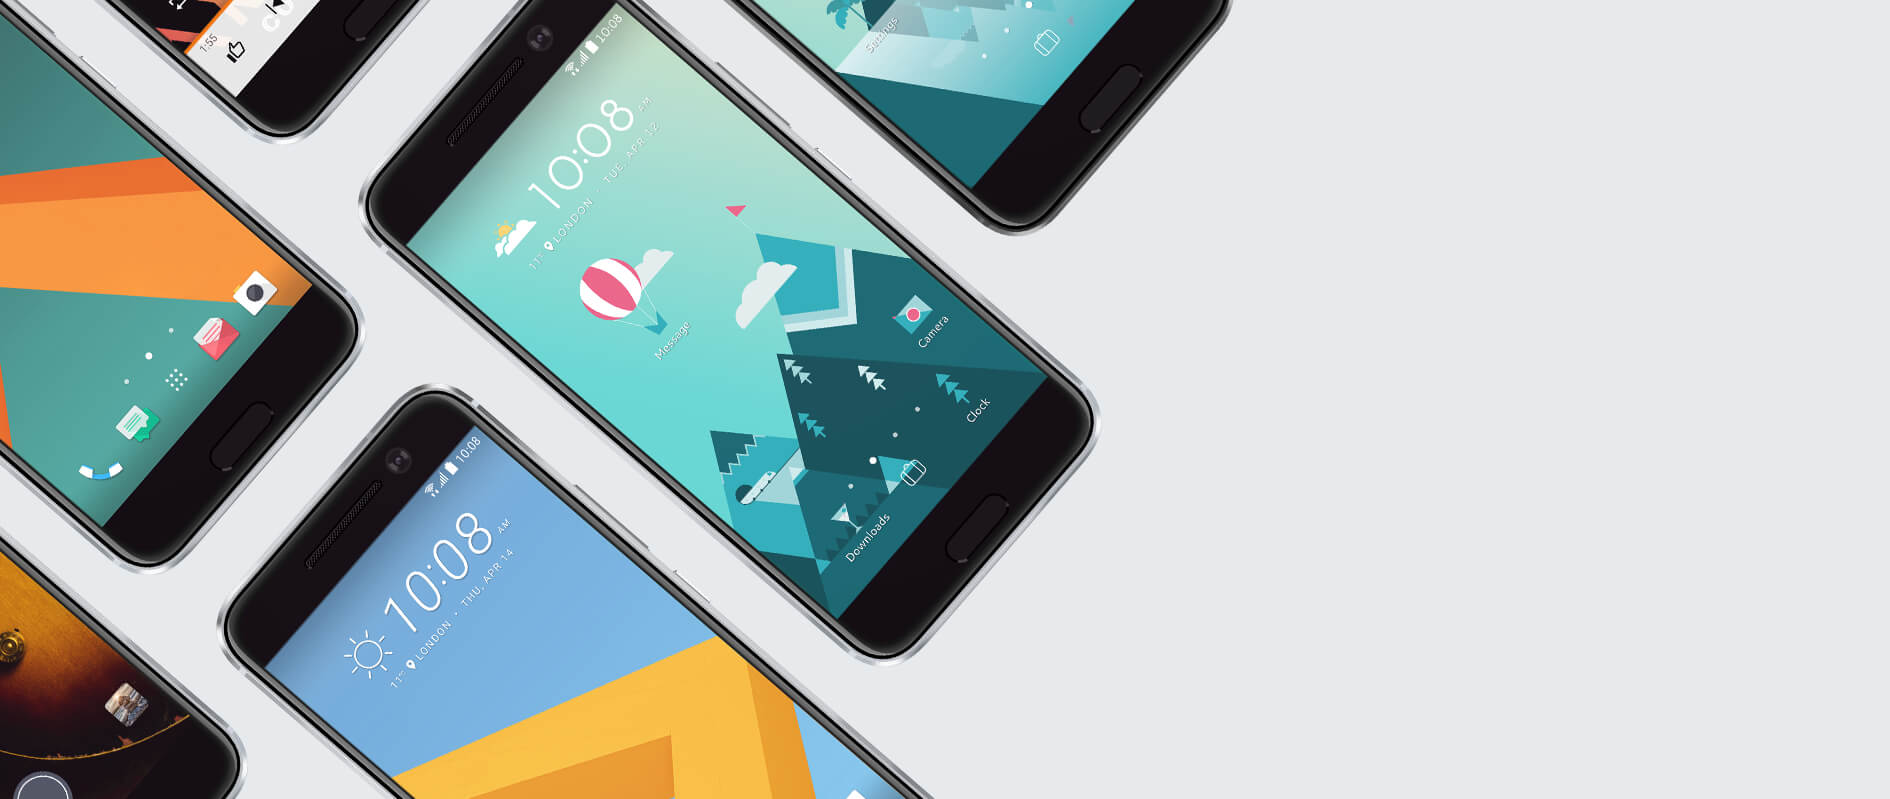 HTC 10 Android Lollipop